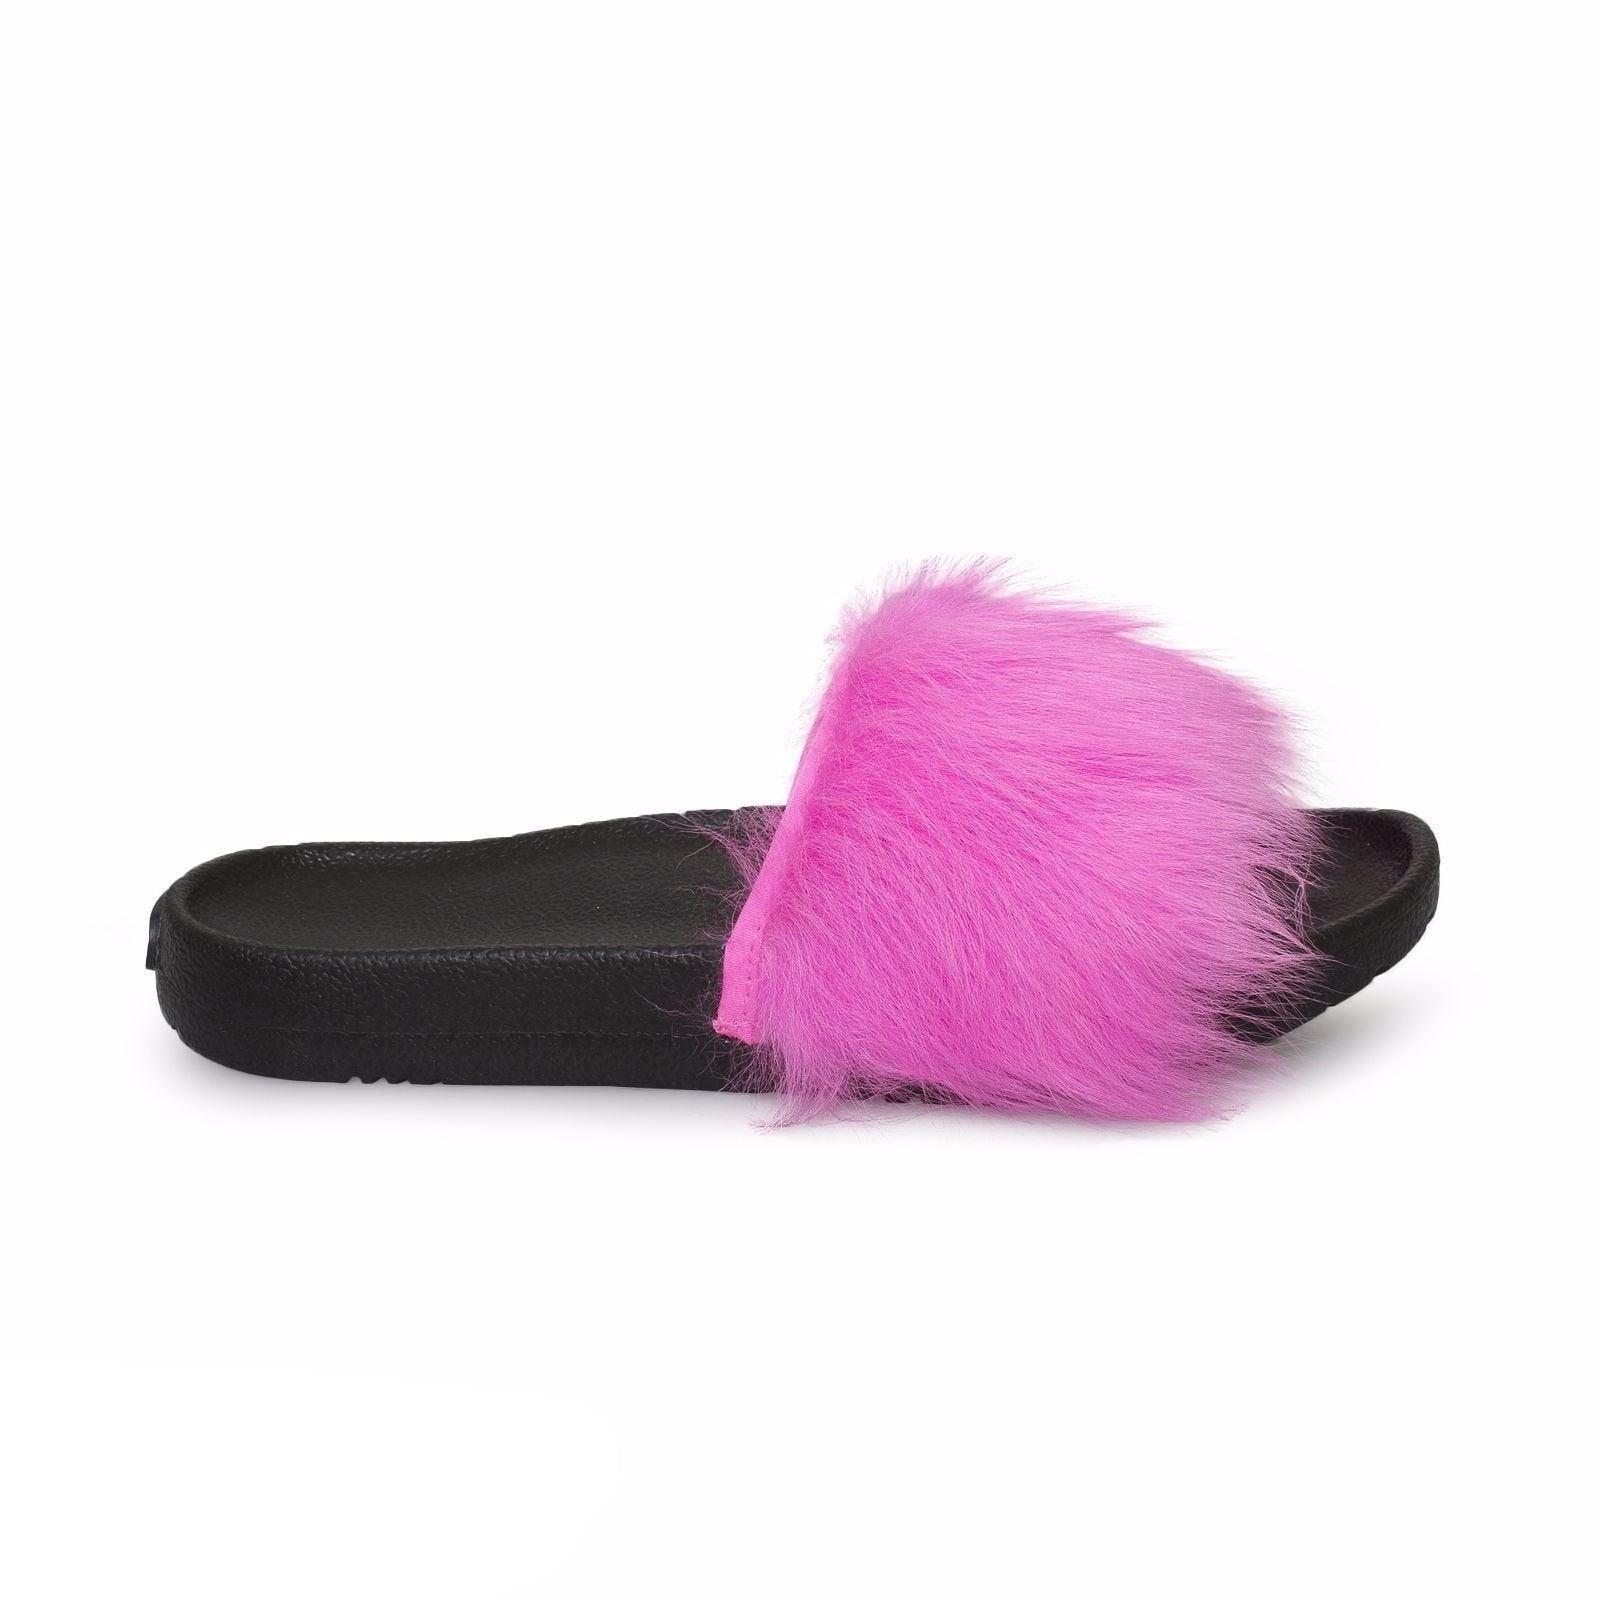 neon pink slippers